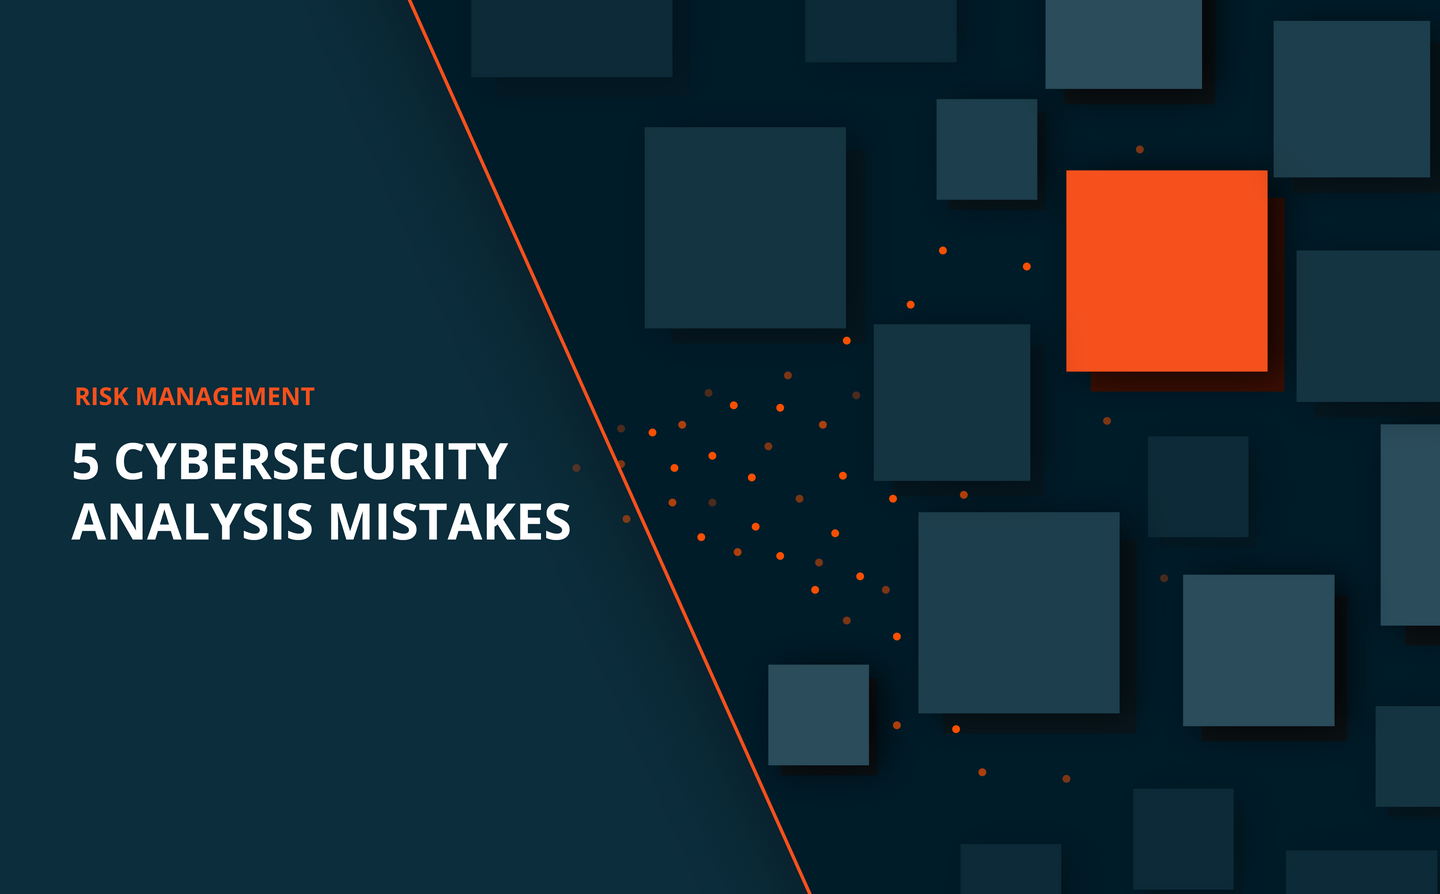 5 cybersecurity analysis mistakes that can leave organizations at risk